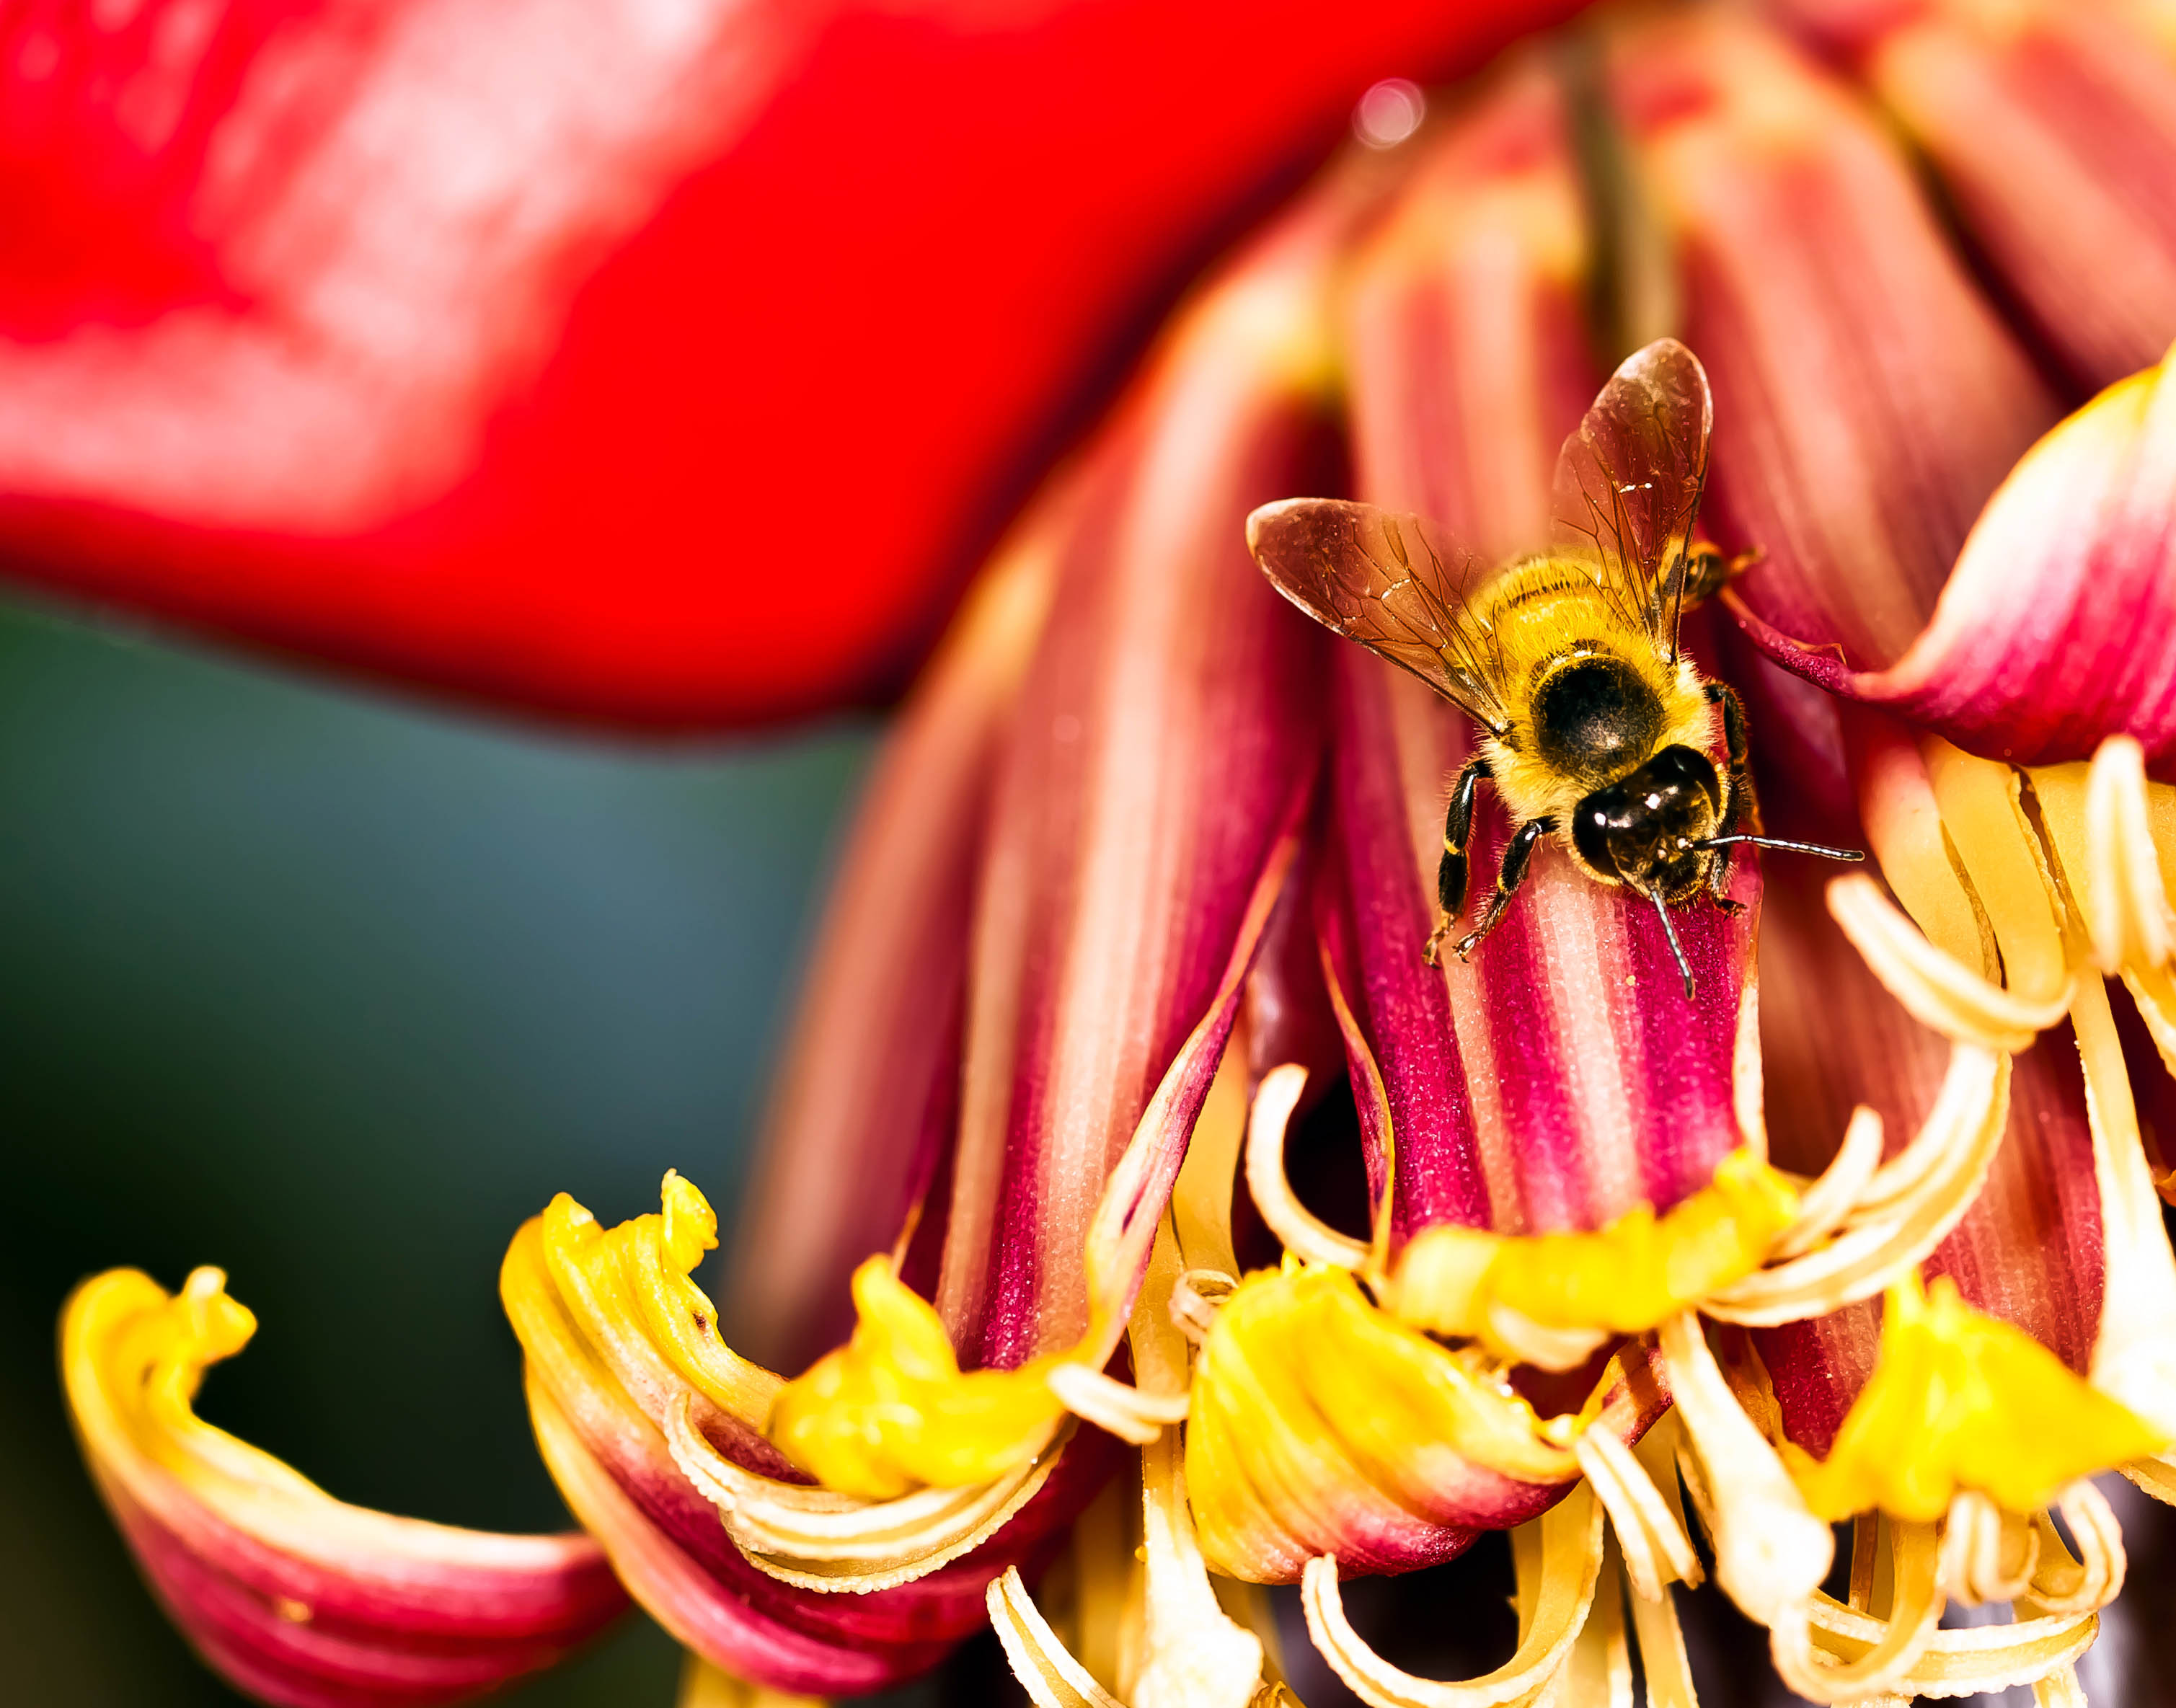 Flower of the banana and a bee